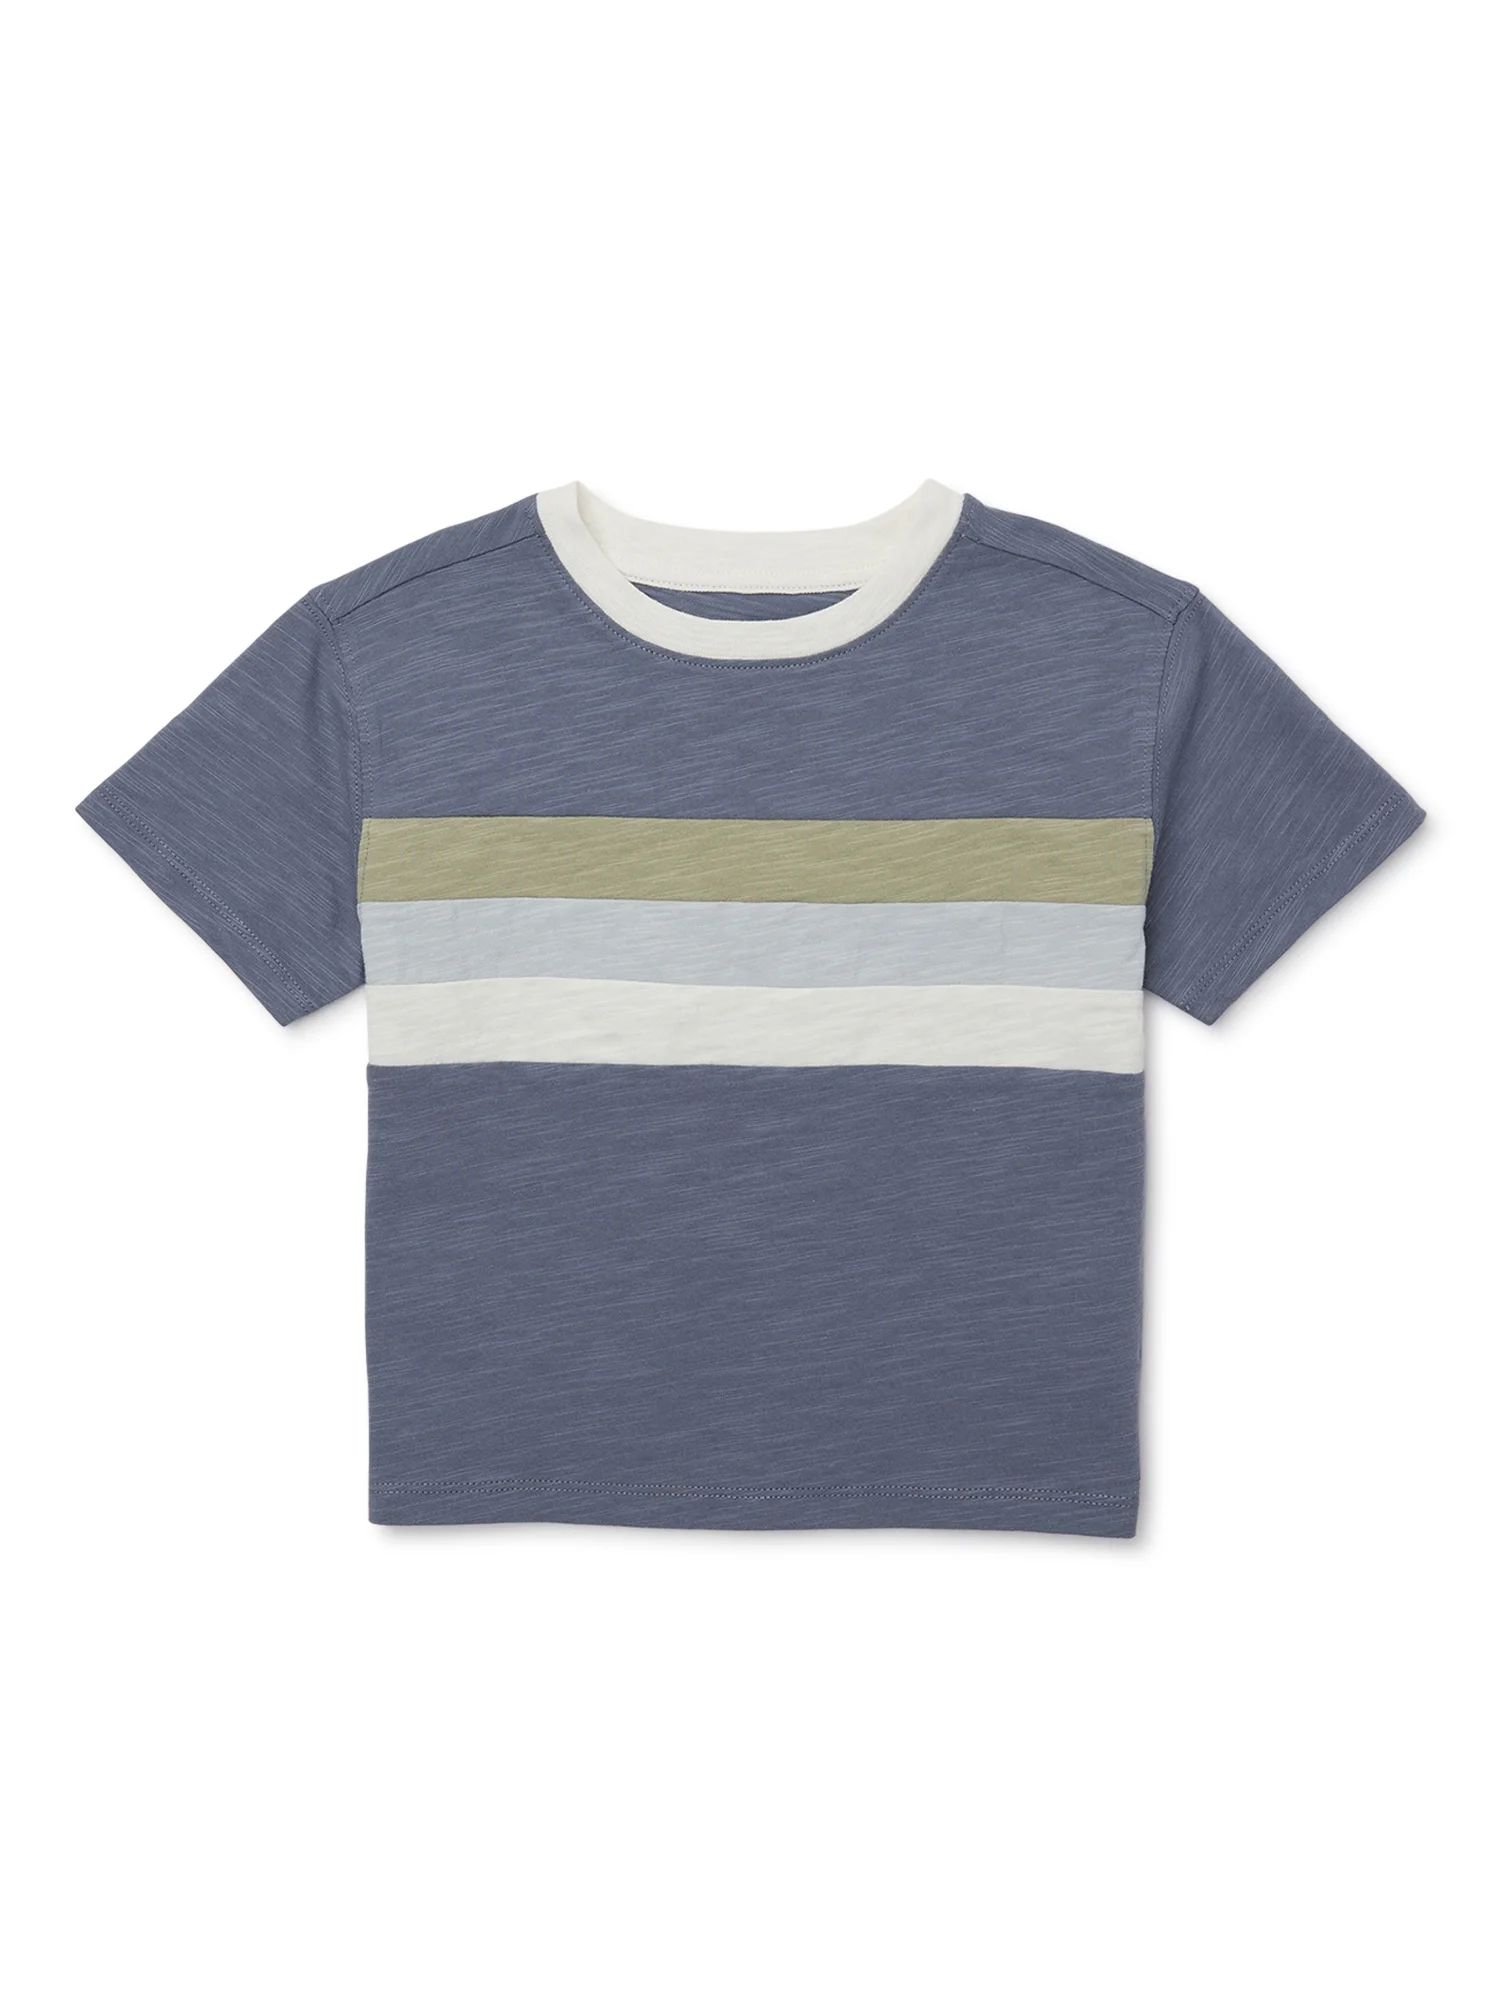 easy-peasy Toddler Boys’ Striped Ringer T-Shirt with Short Sleeves, Sizes 18M-5T | Walmart (US)